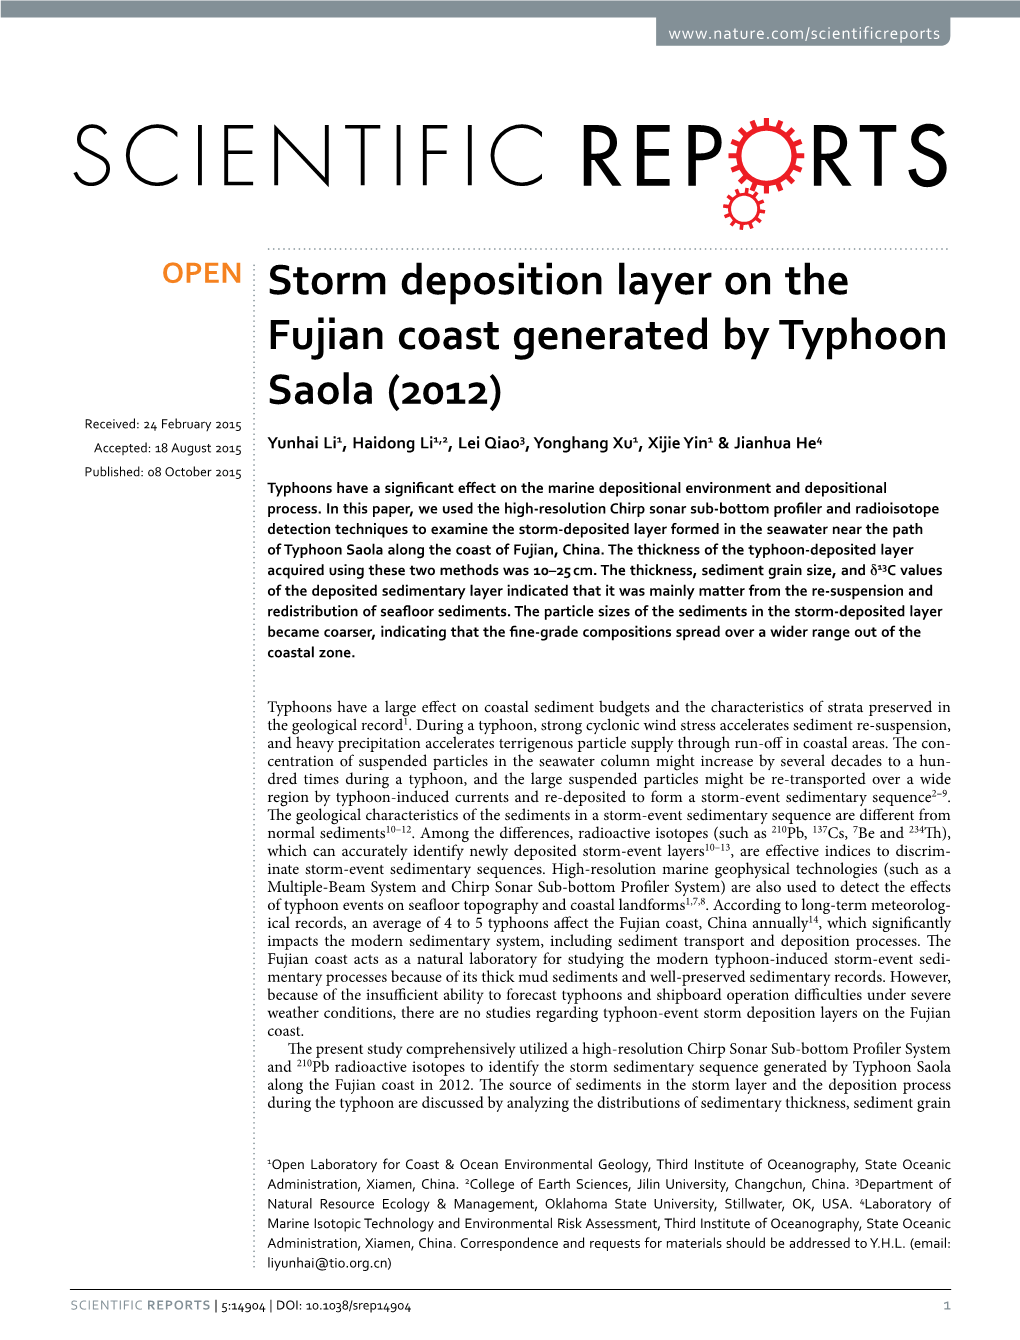 Storm Deposition Layer on the Fujian Coast Generated by Typhoon Saola